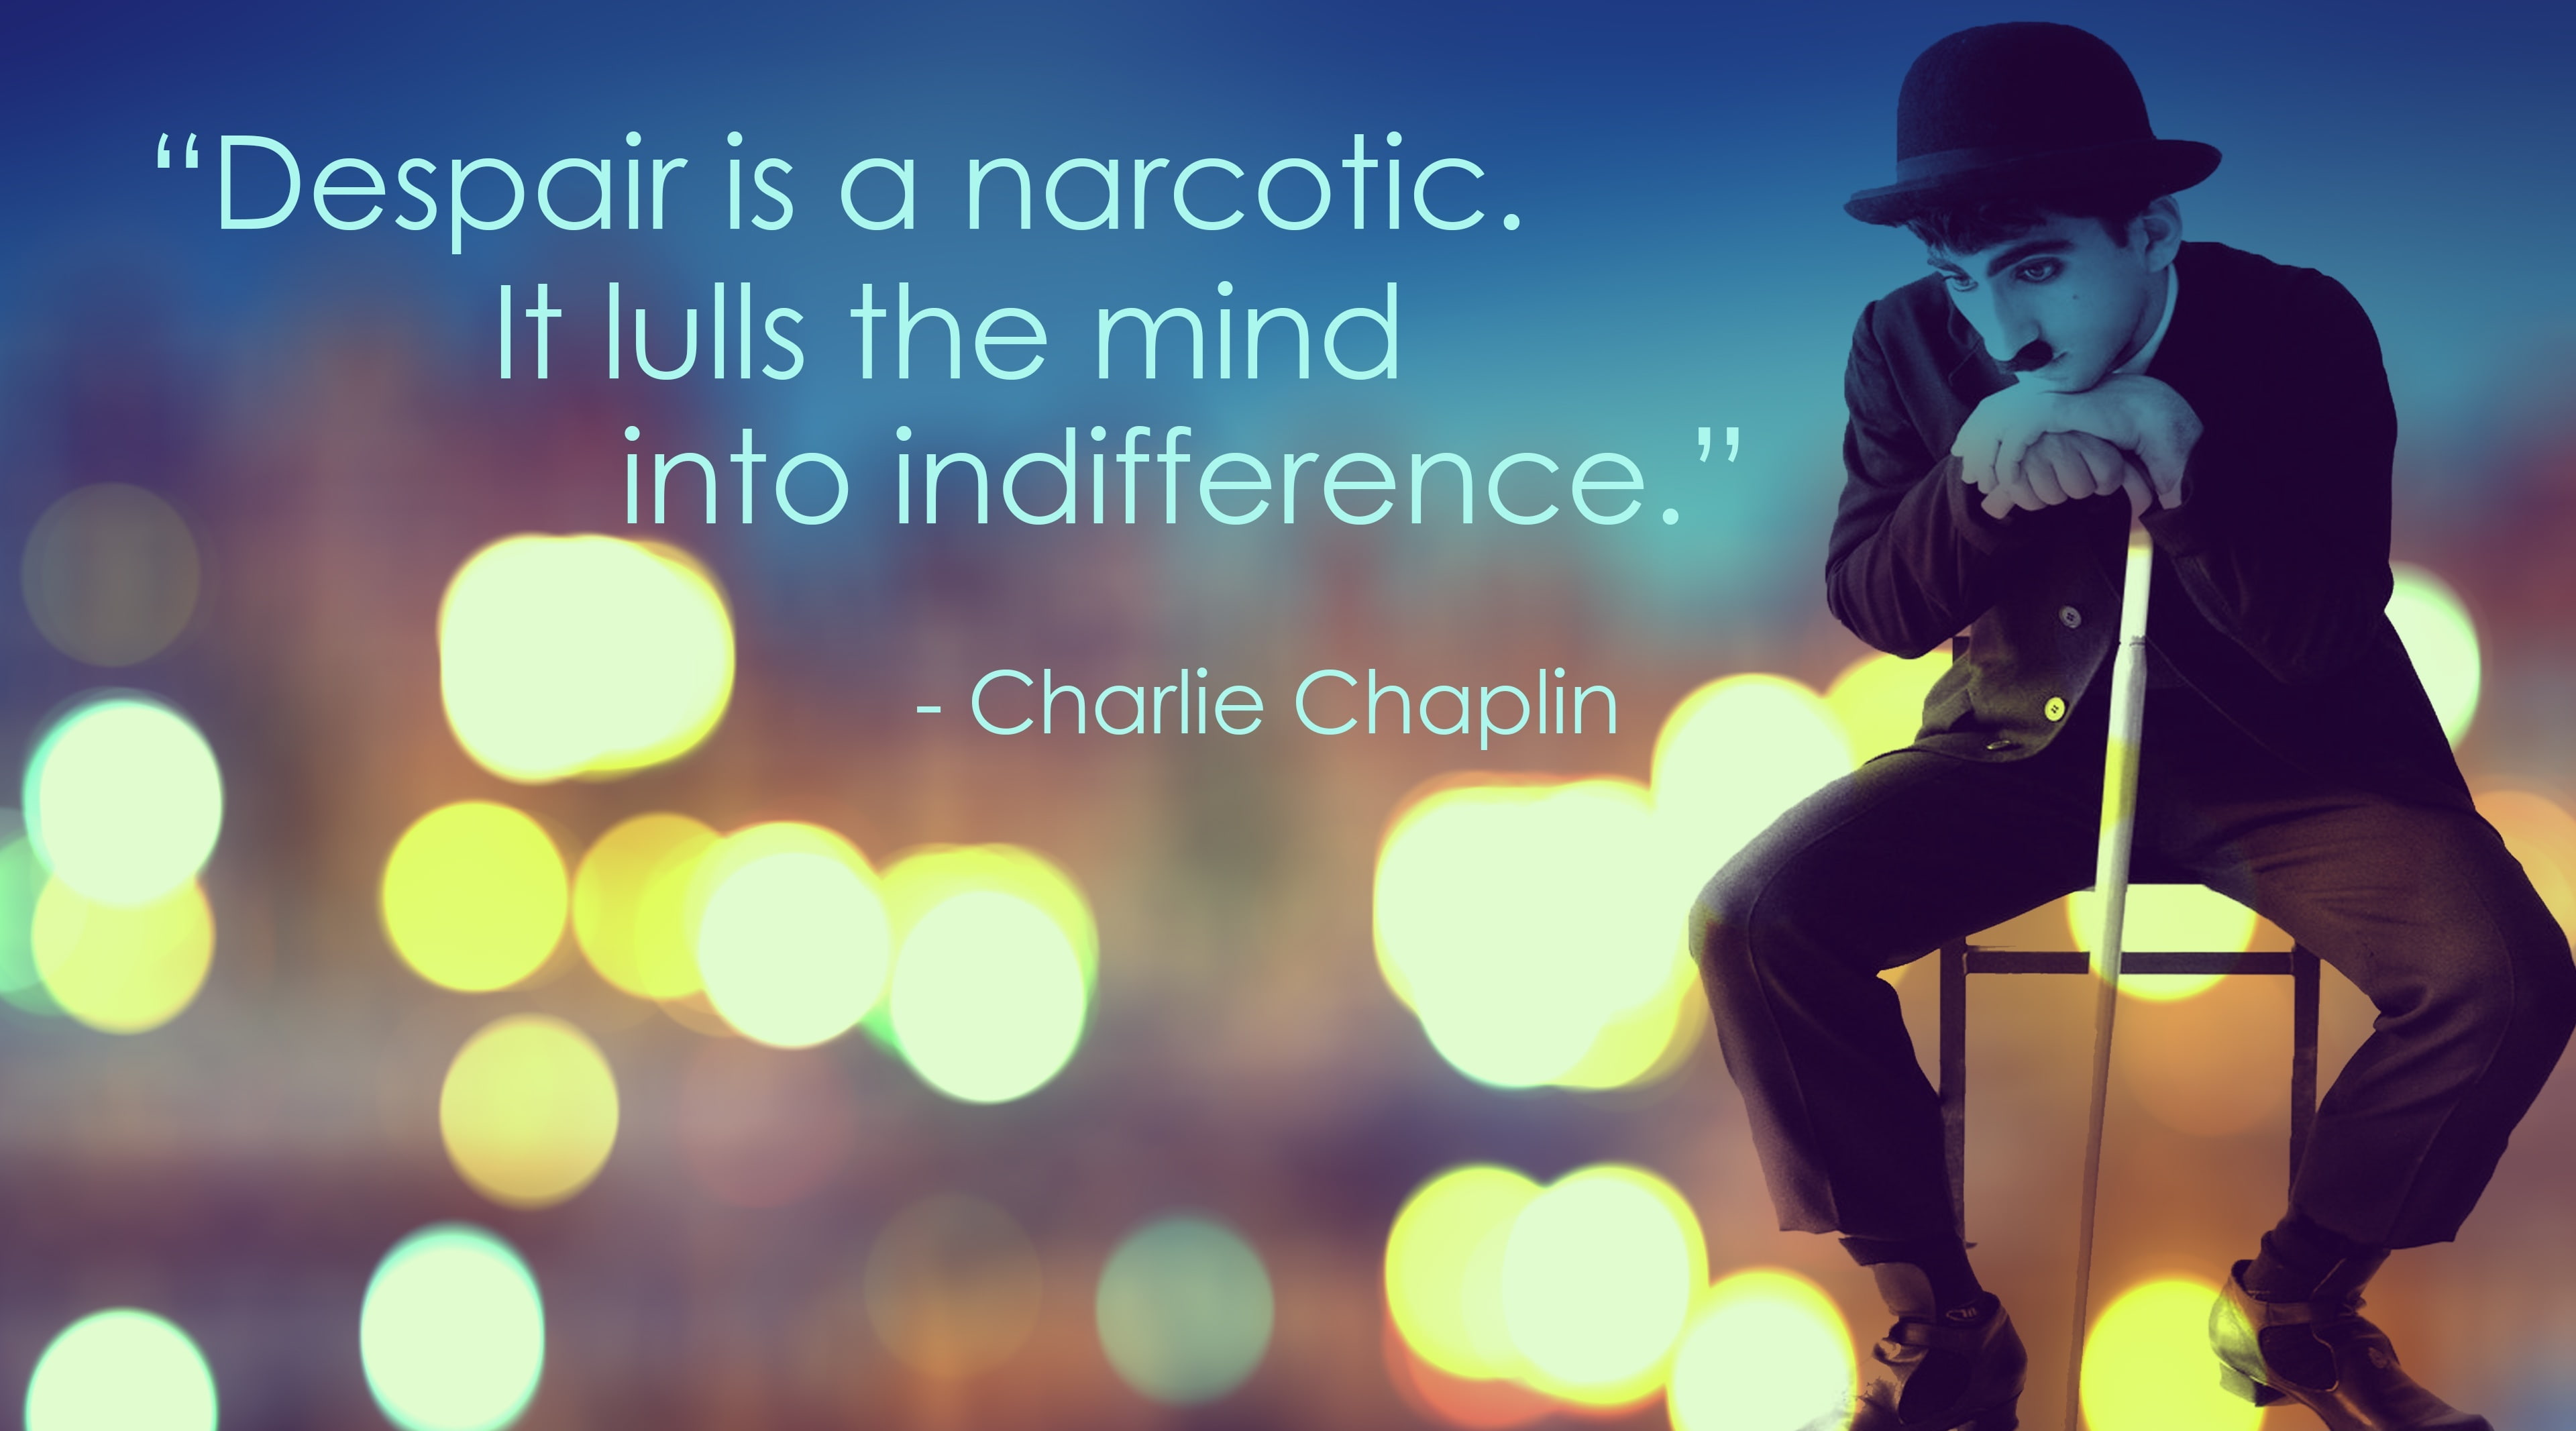 Charlie Chaplin Quote, Charlie Chaplin, Artistic, Typography